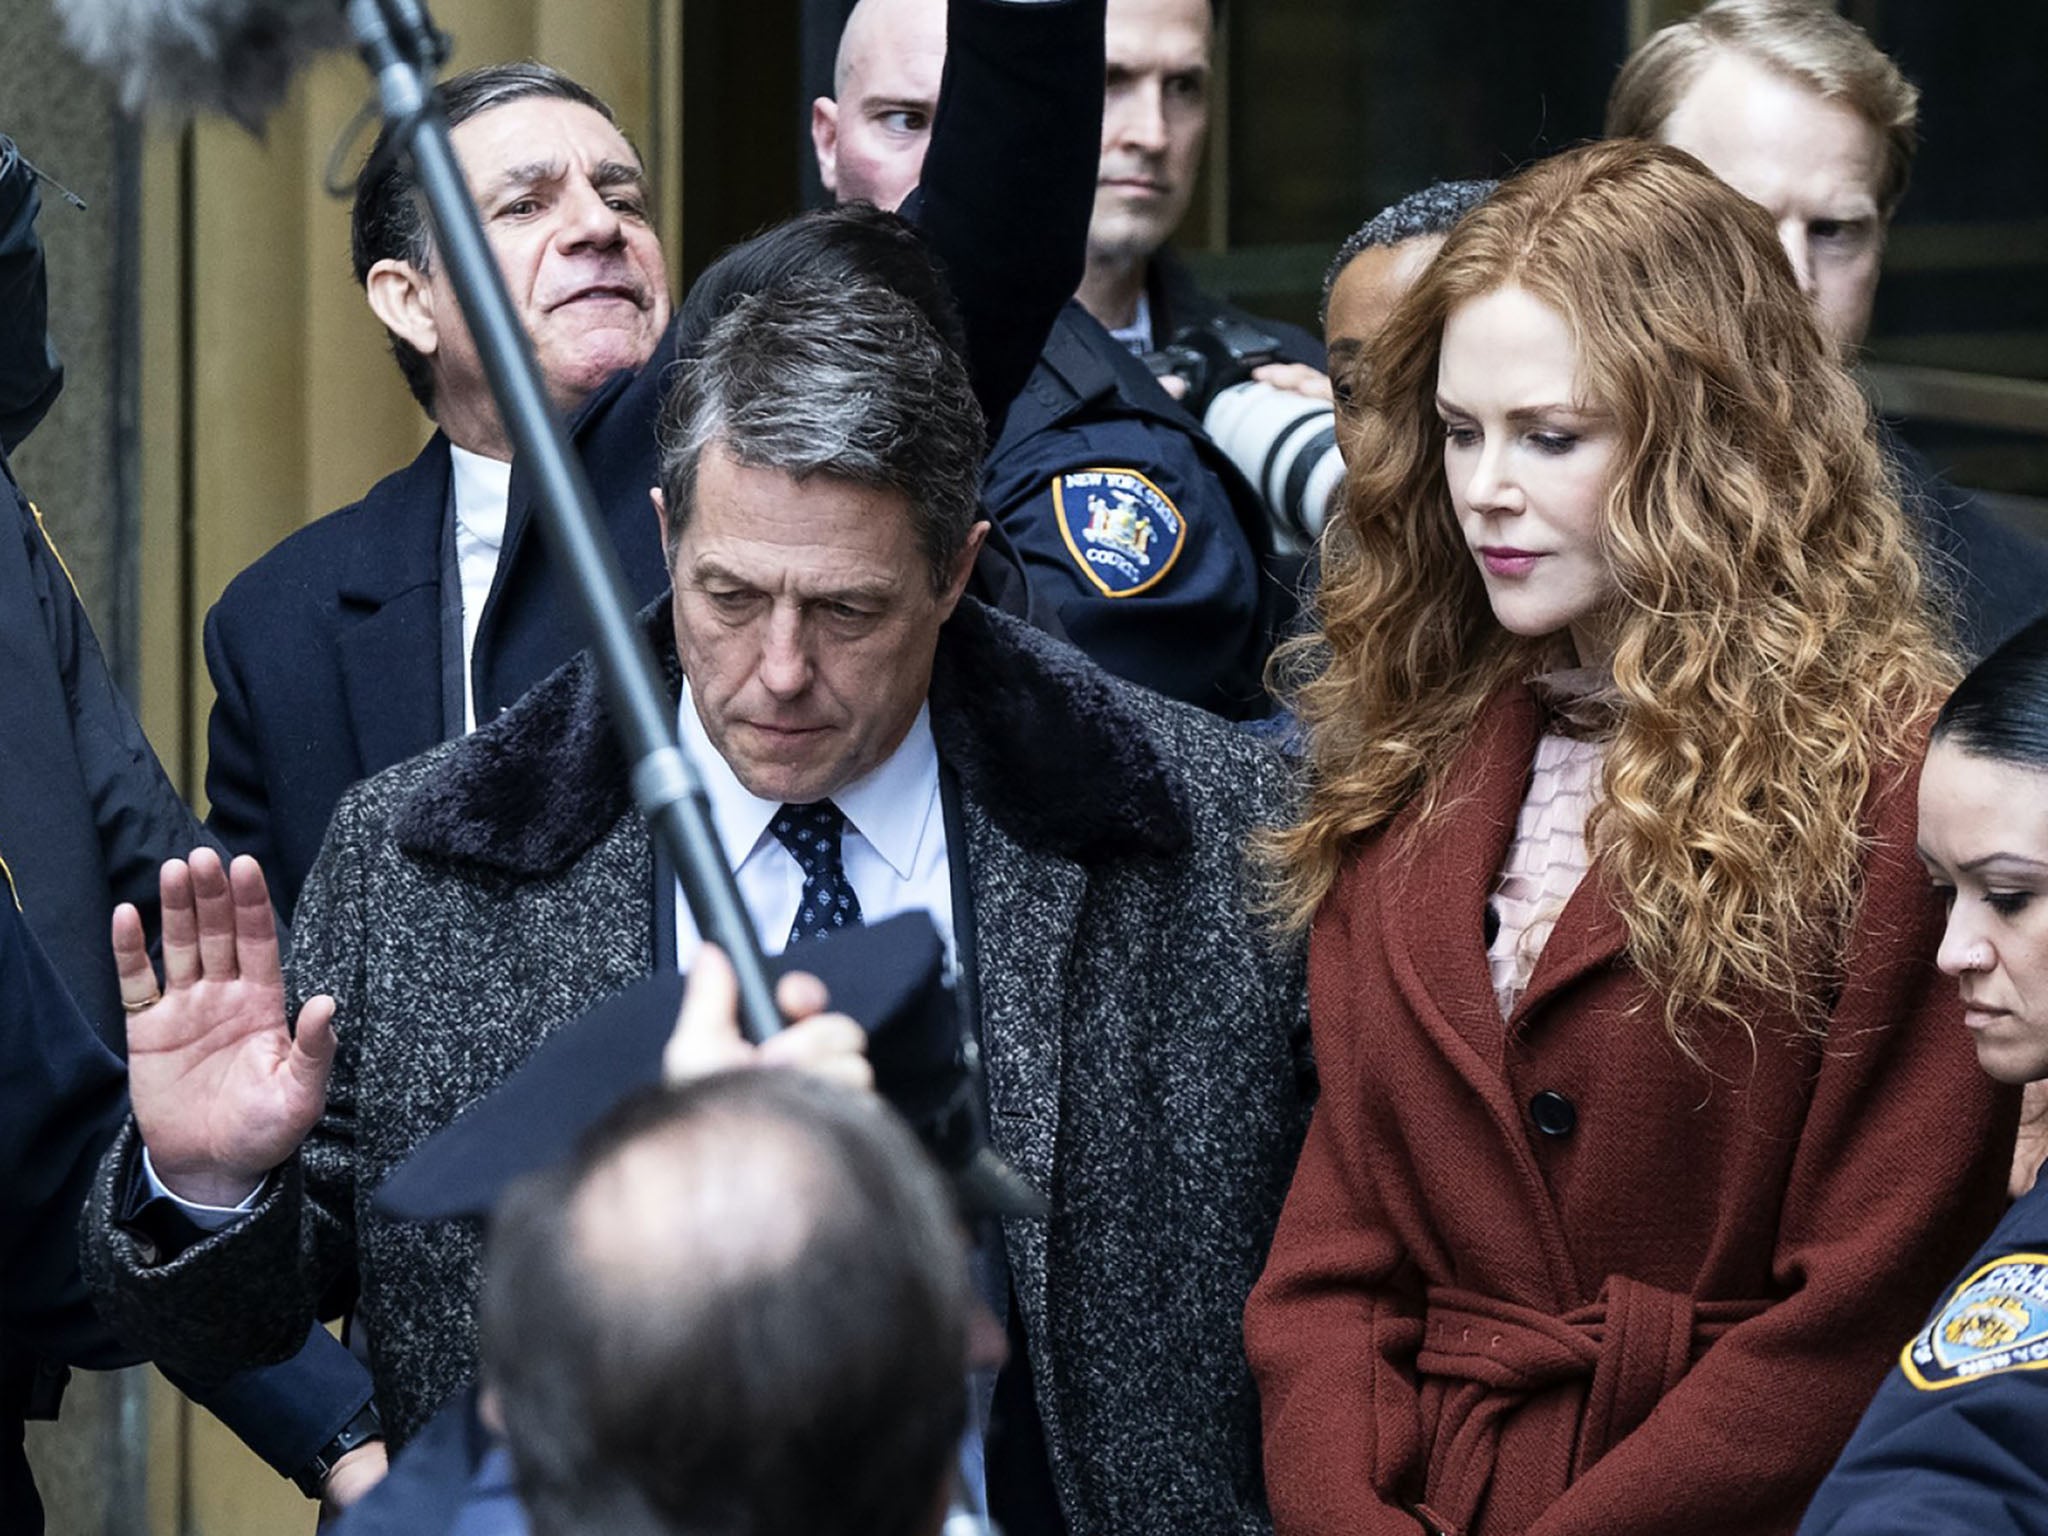 Hugh Grant Joins Nicole Kidman in HBO Limited Series 'The Undoing